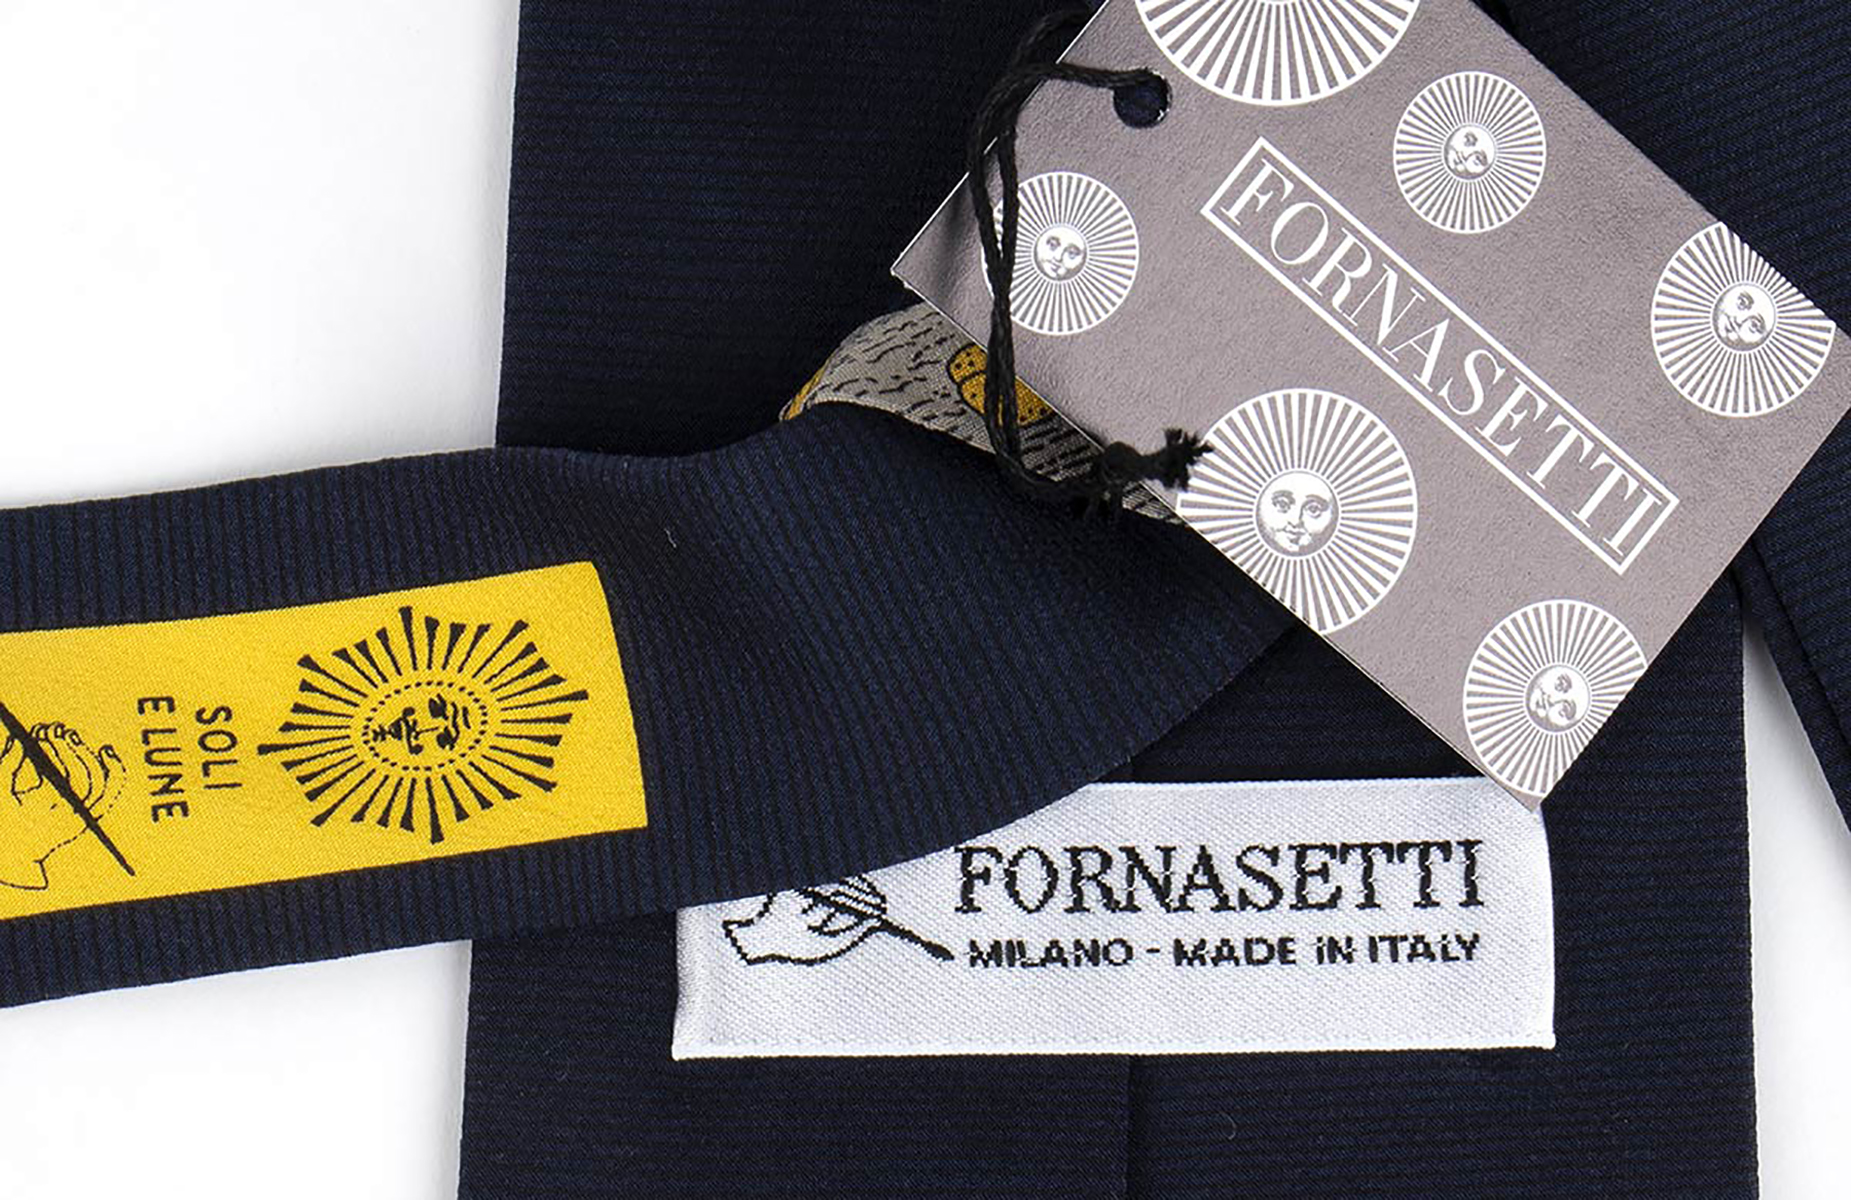 FORNASETTI SILK TIE 80s Silk tie with original box. General Conditions grading A (new with tag) - Image 3 of 3